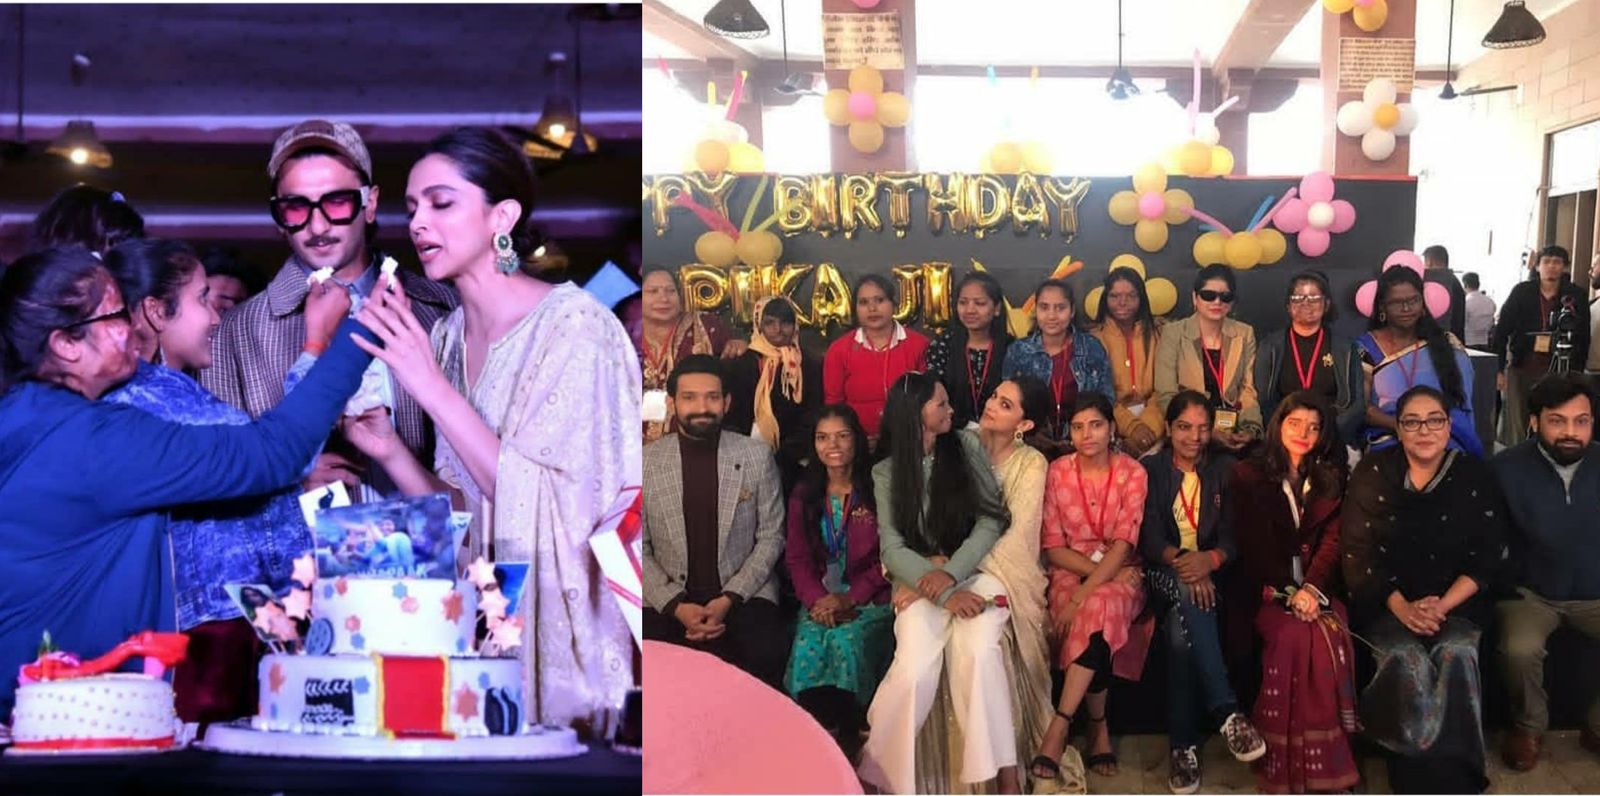 Deepika Padukone Spends Her 34th Birthday With Acid Attack Survivors, Poses With Laxmi Agarwal On Her Lap!